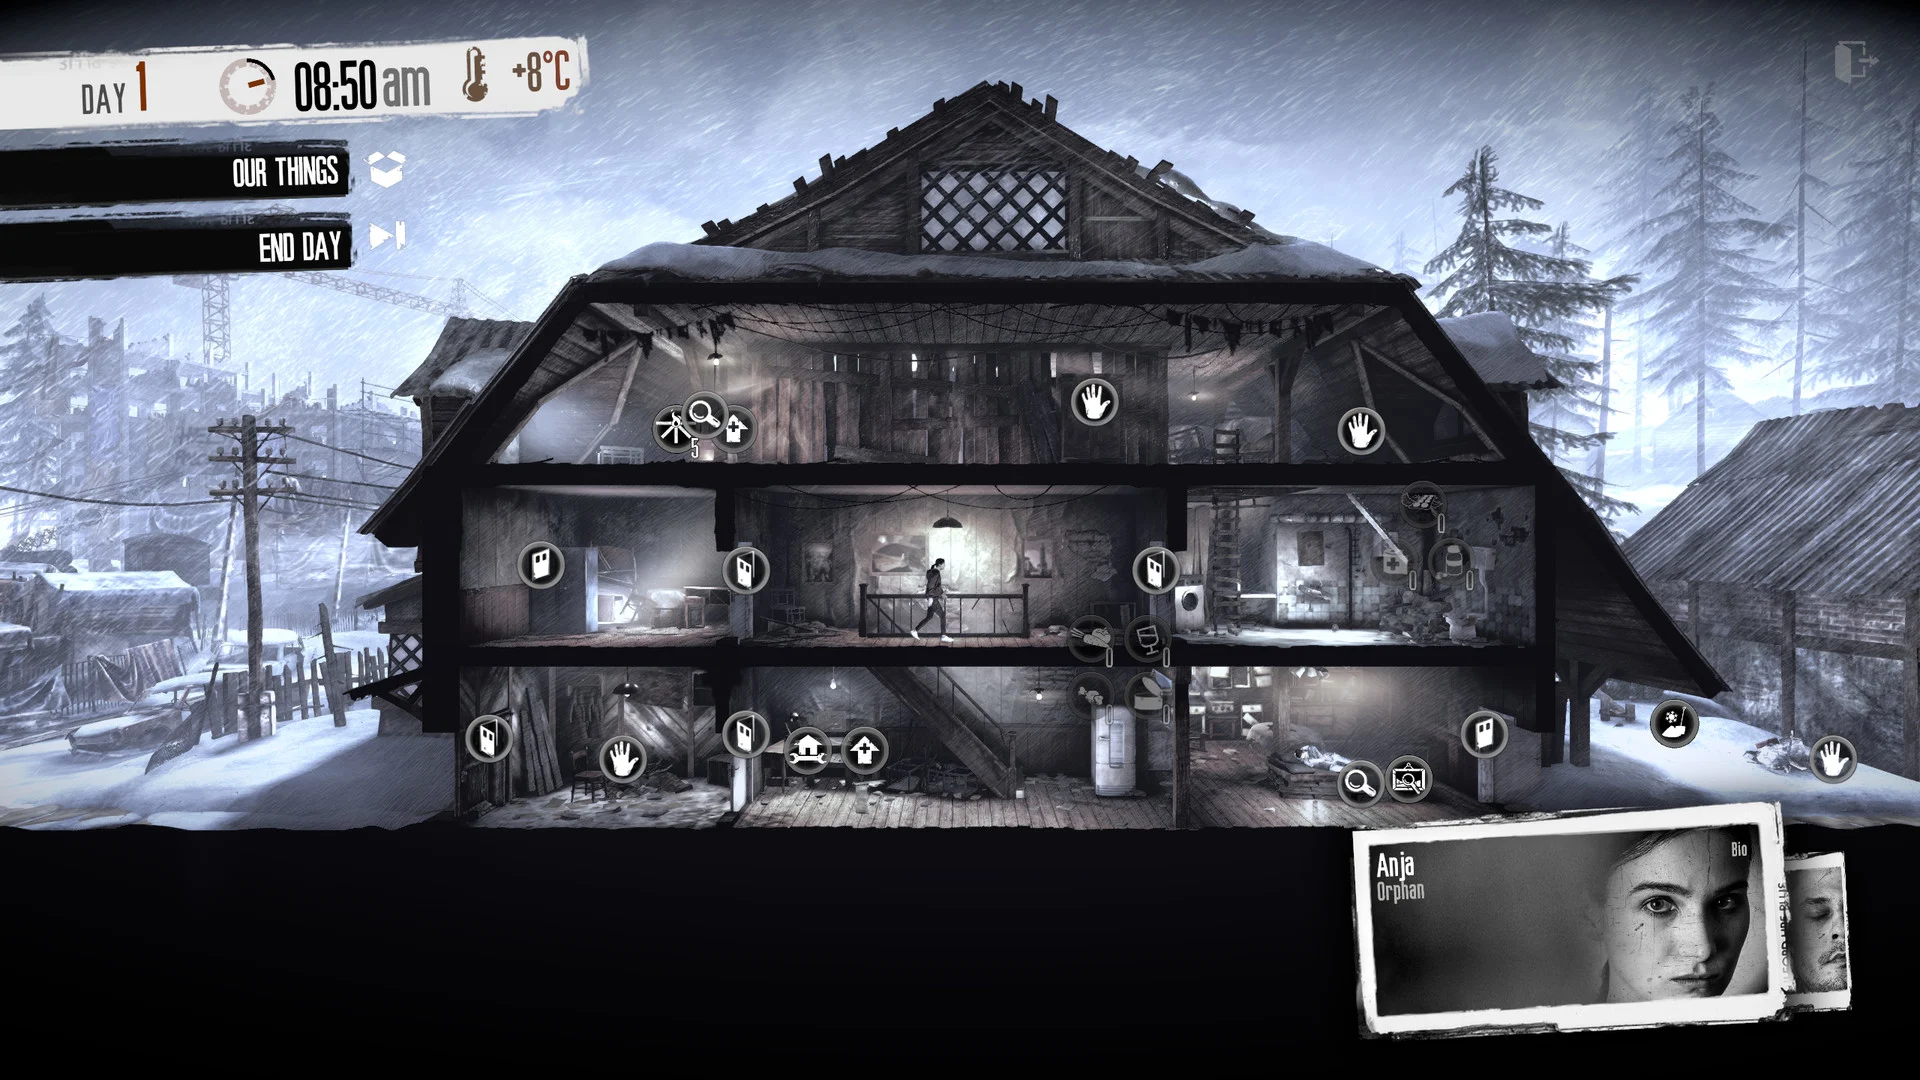 Scully over het algemeen Ruimteschip This War of Mine and Fading Embers DLC Indie Game Review - Geeky Hobbies